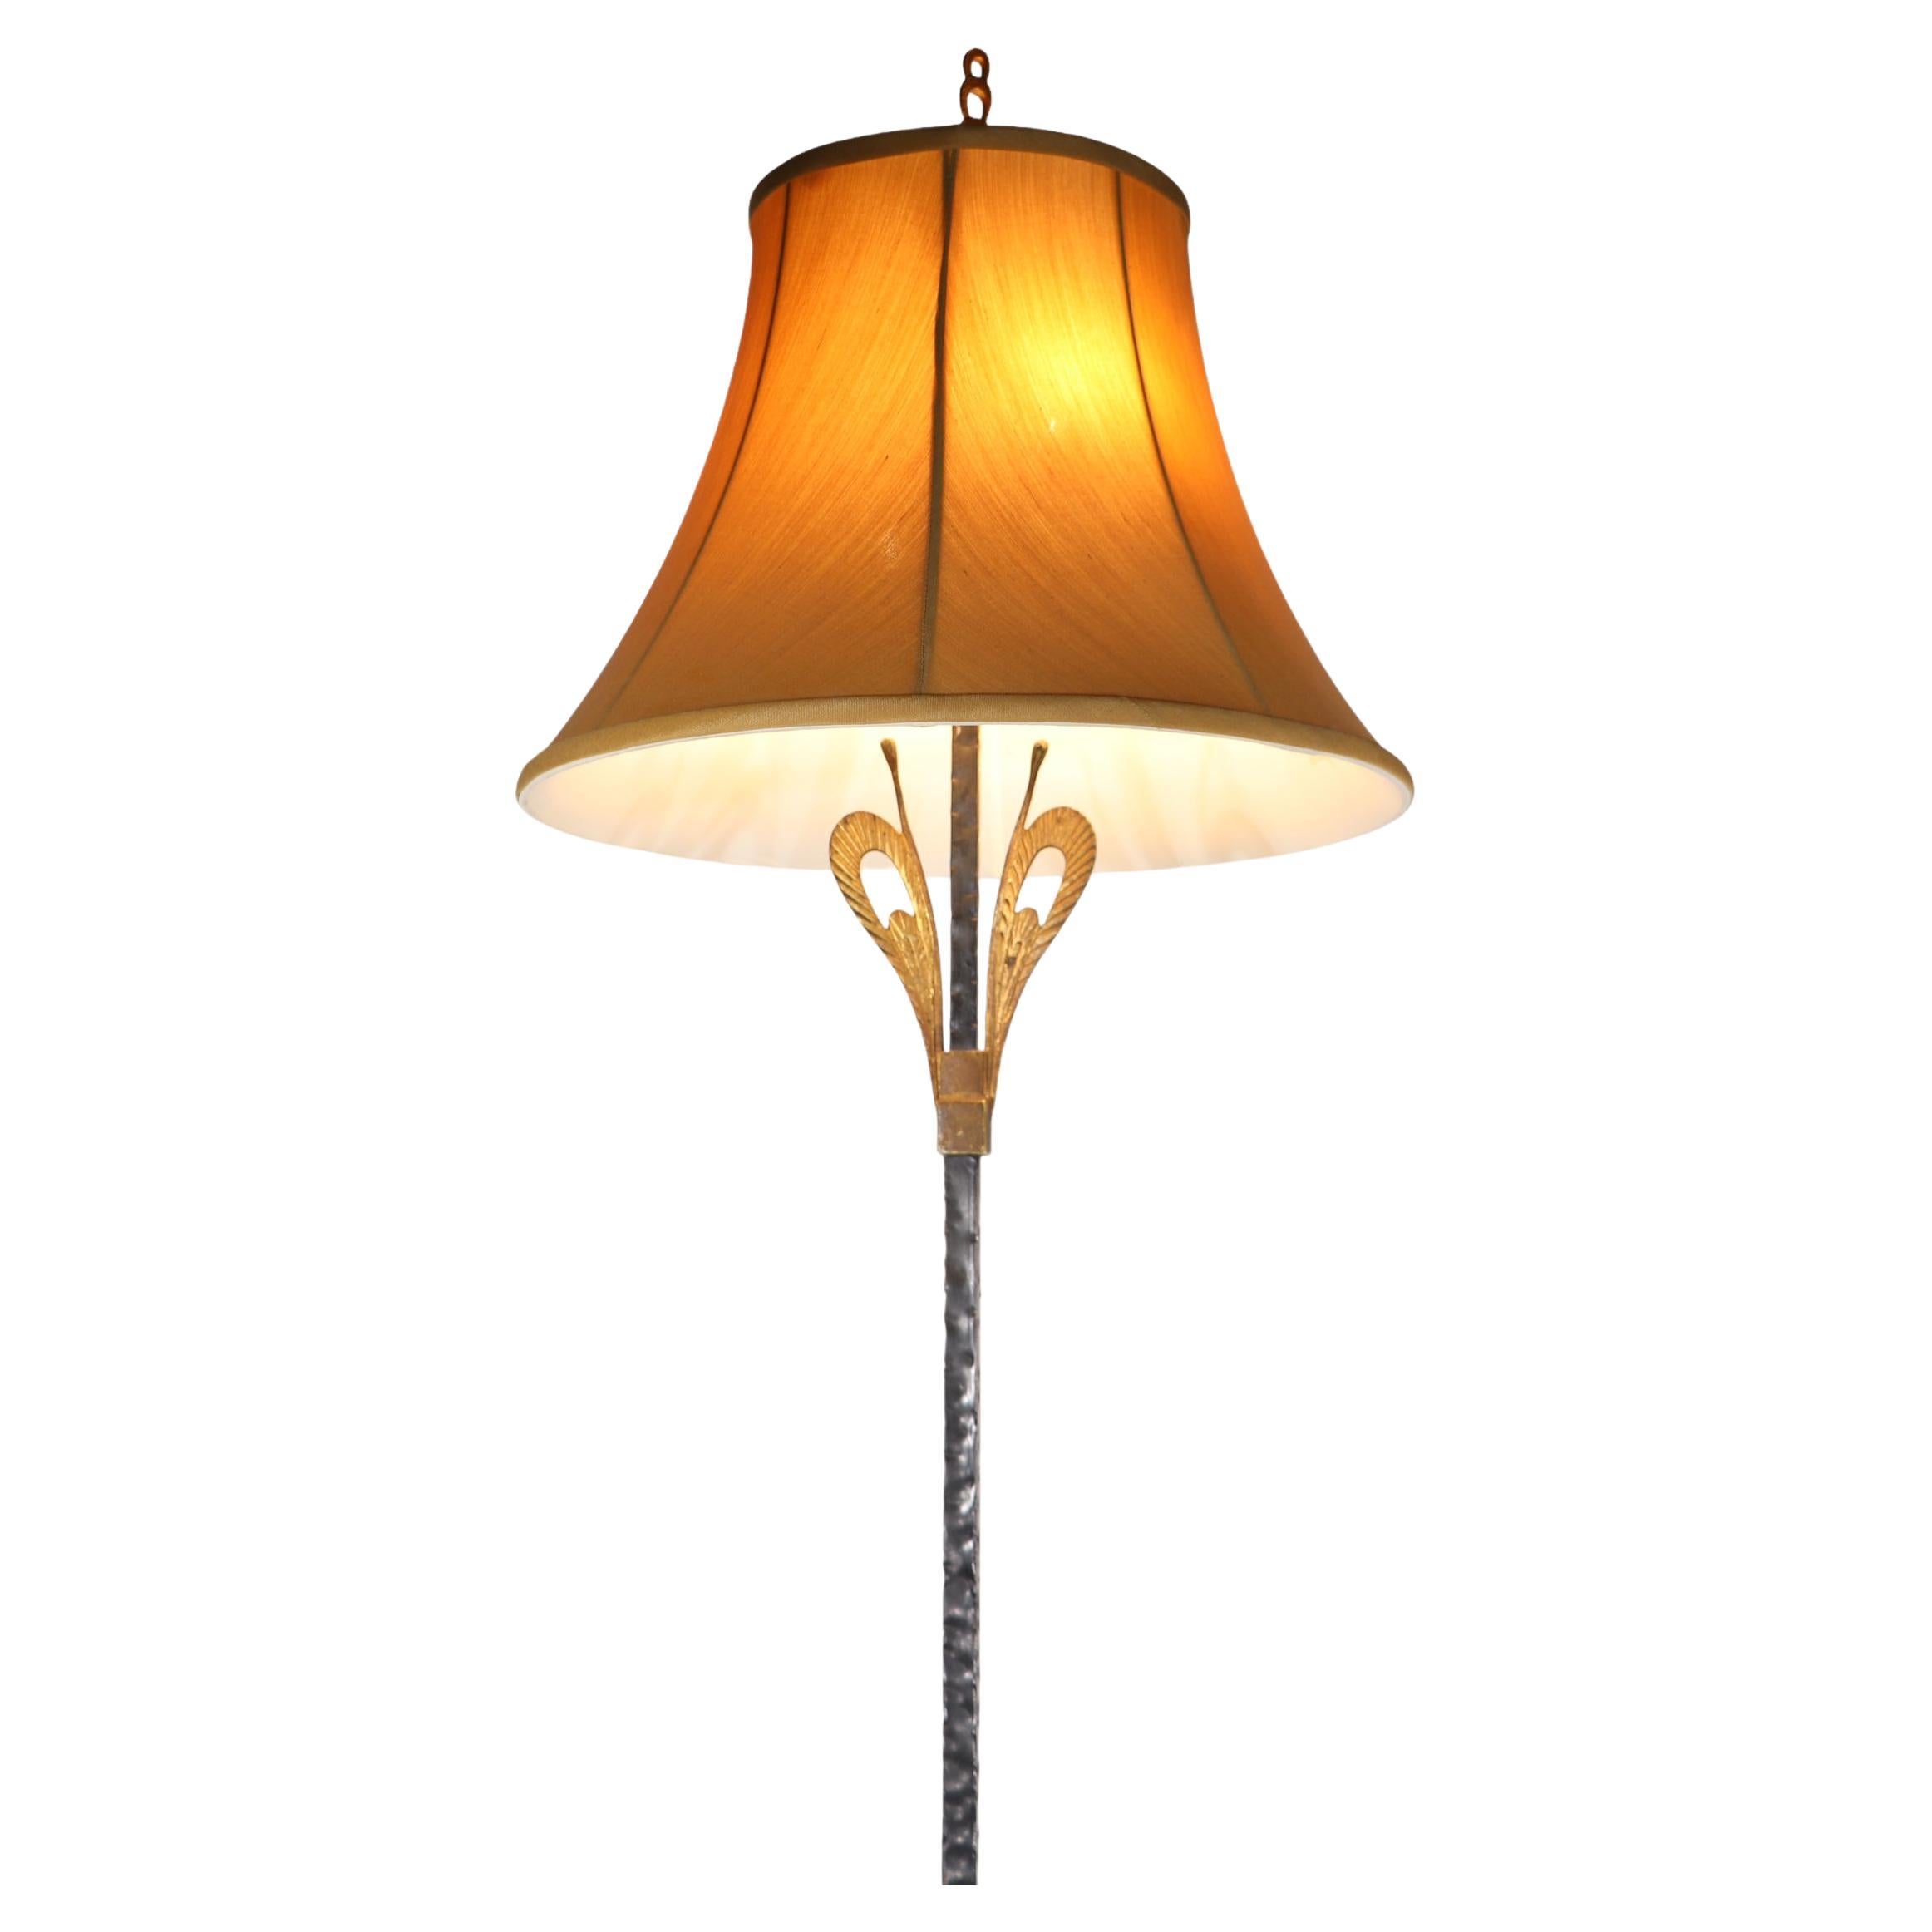 Classic Art Deco flor lamp having a hammered metal vertical shaft, with a stylized hammered iron base, with a brass foliate decorative element at the top of the central vertical standard. Executed in the style of Edgar Brandt, and Oscar Bach, the